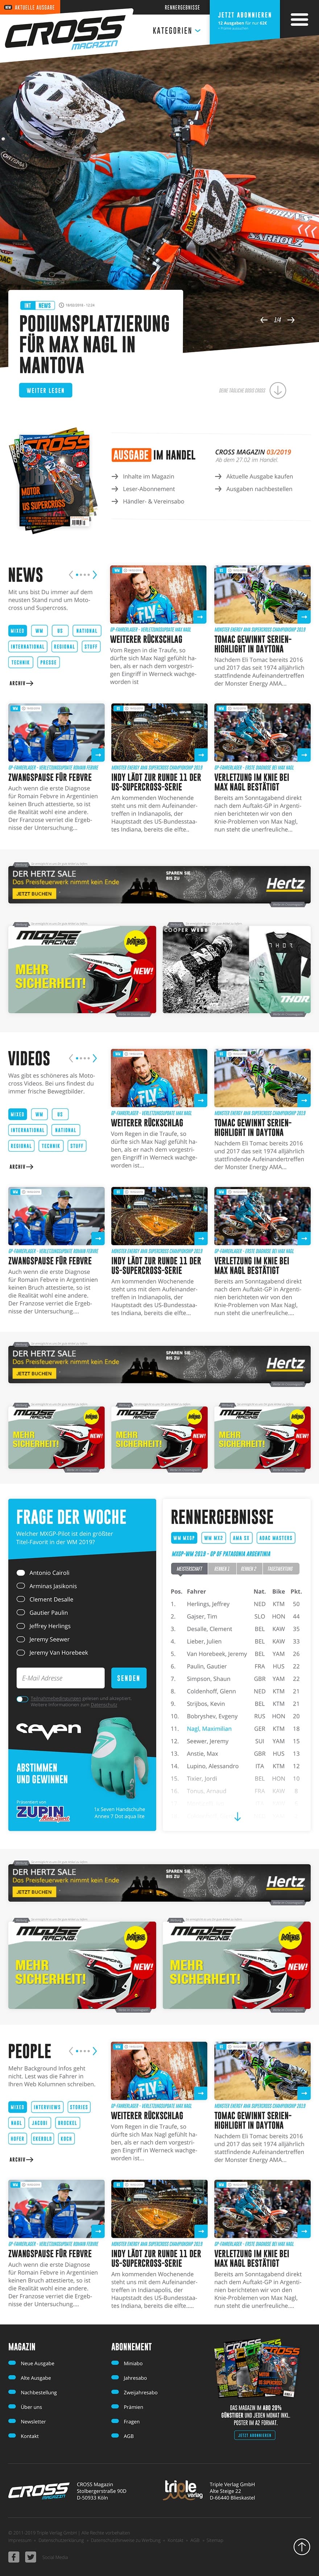 Cross Magazin Mobile First Tablet Version Frontpage